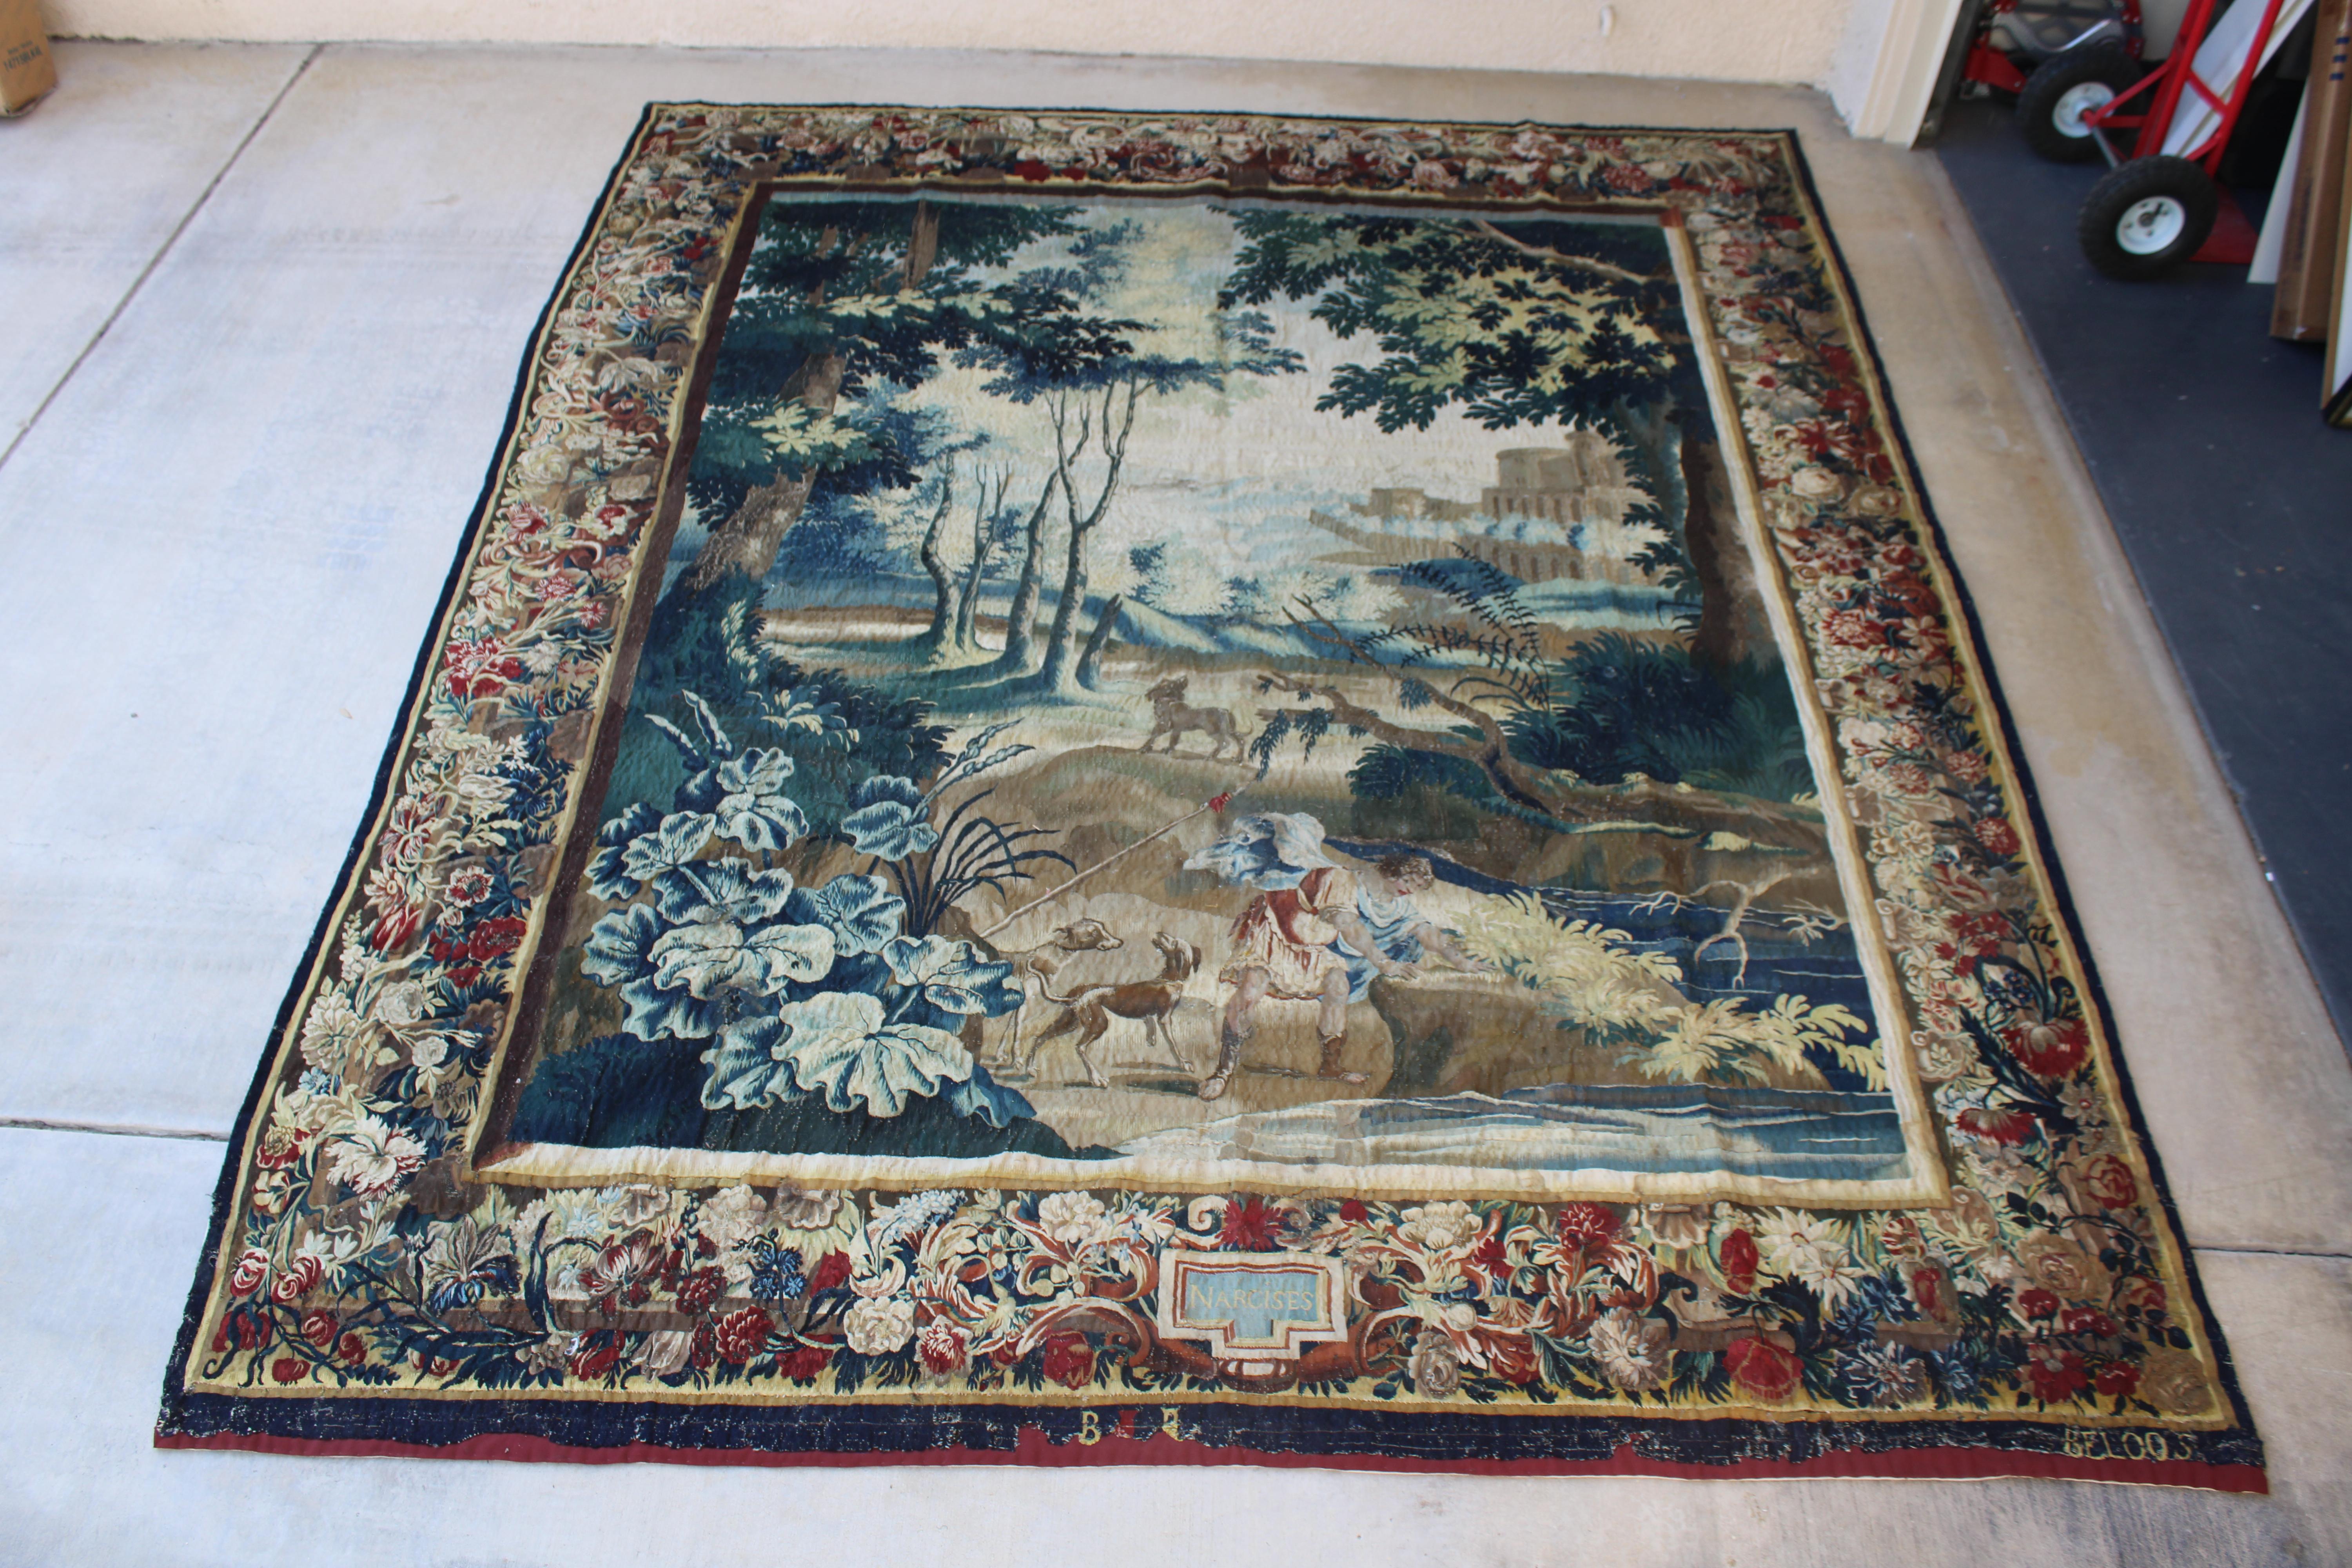 18th century Verdure tapestry measuring approximately 8 by 10 feet. Originally made popular in French courts in the 1600’s They were very popular in the French courts.  This example from the 18th century has an impressive range of colors with a rich